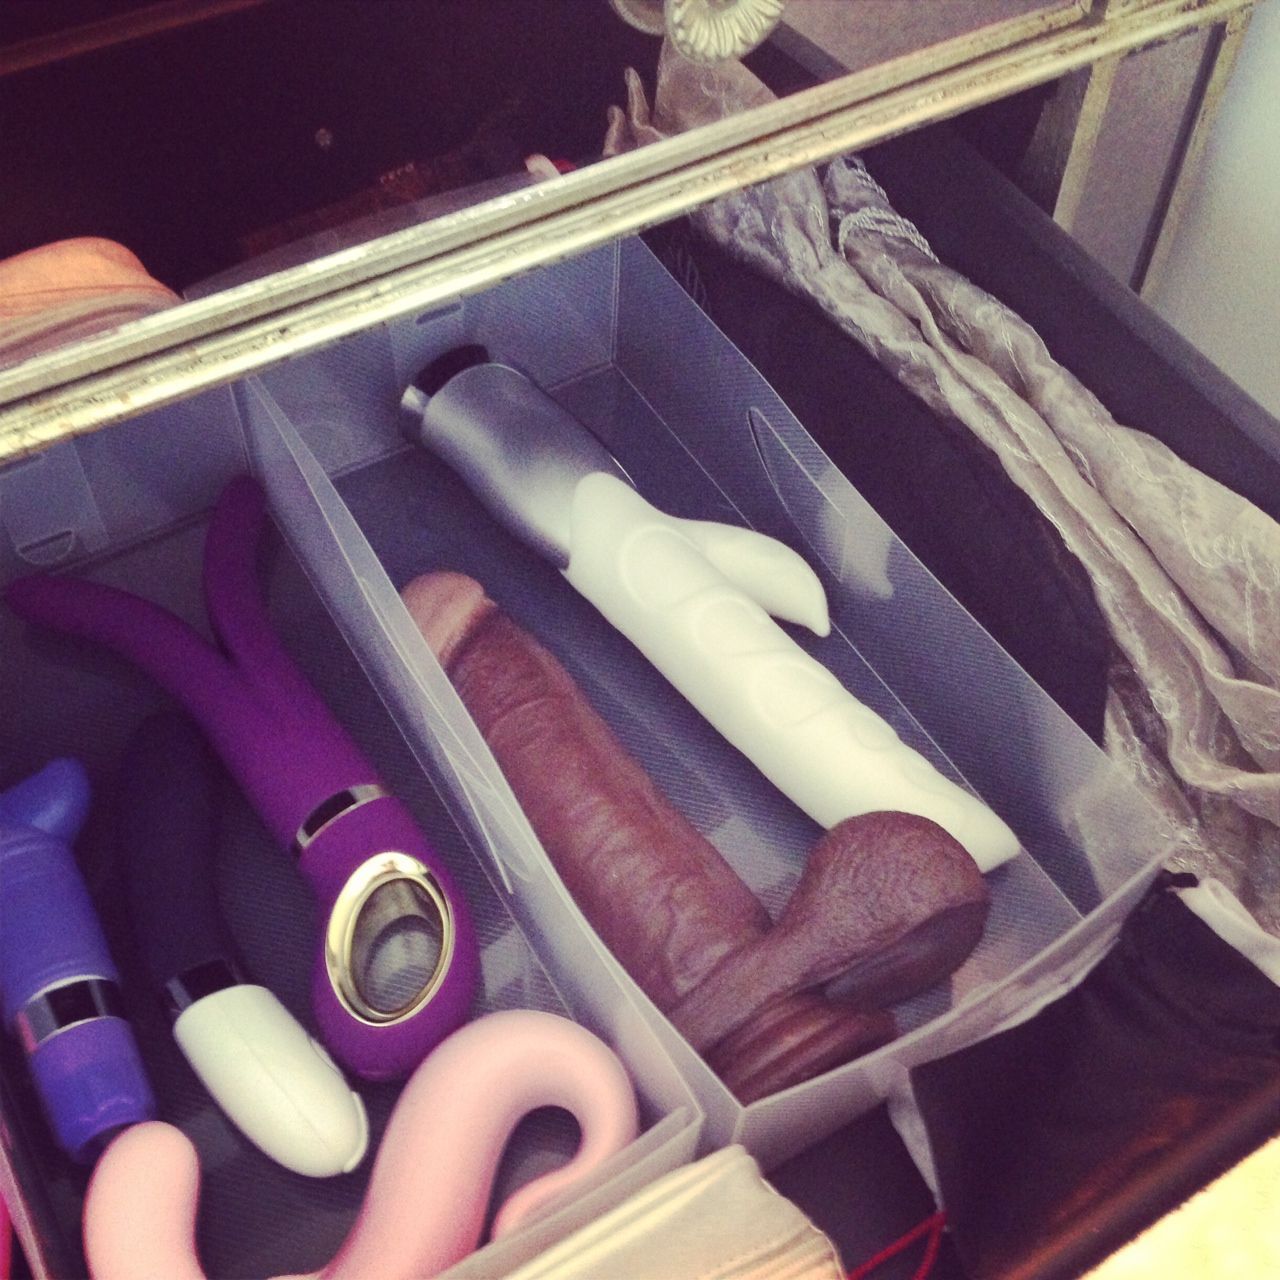 Dildos to travel with